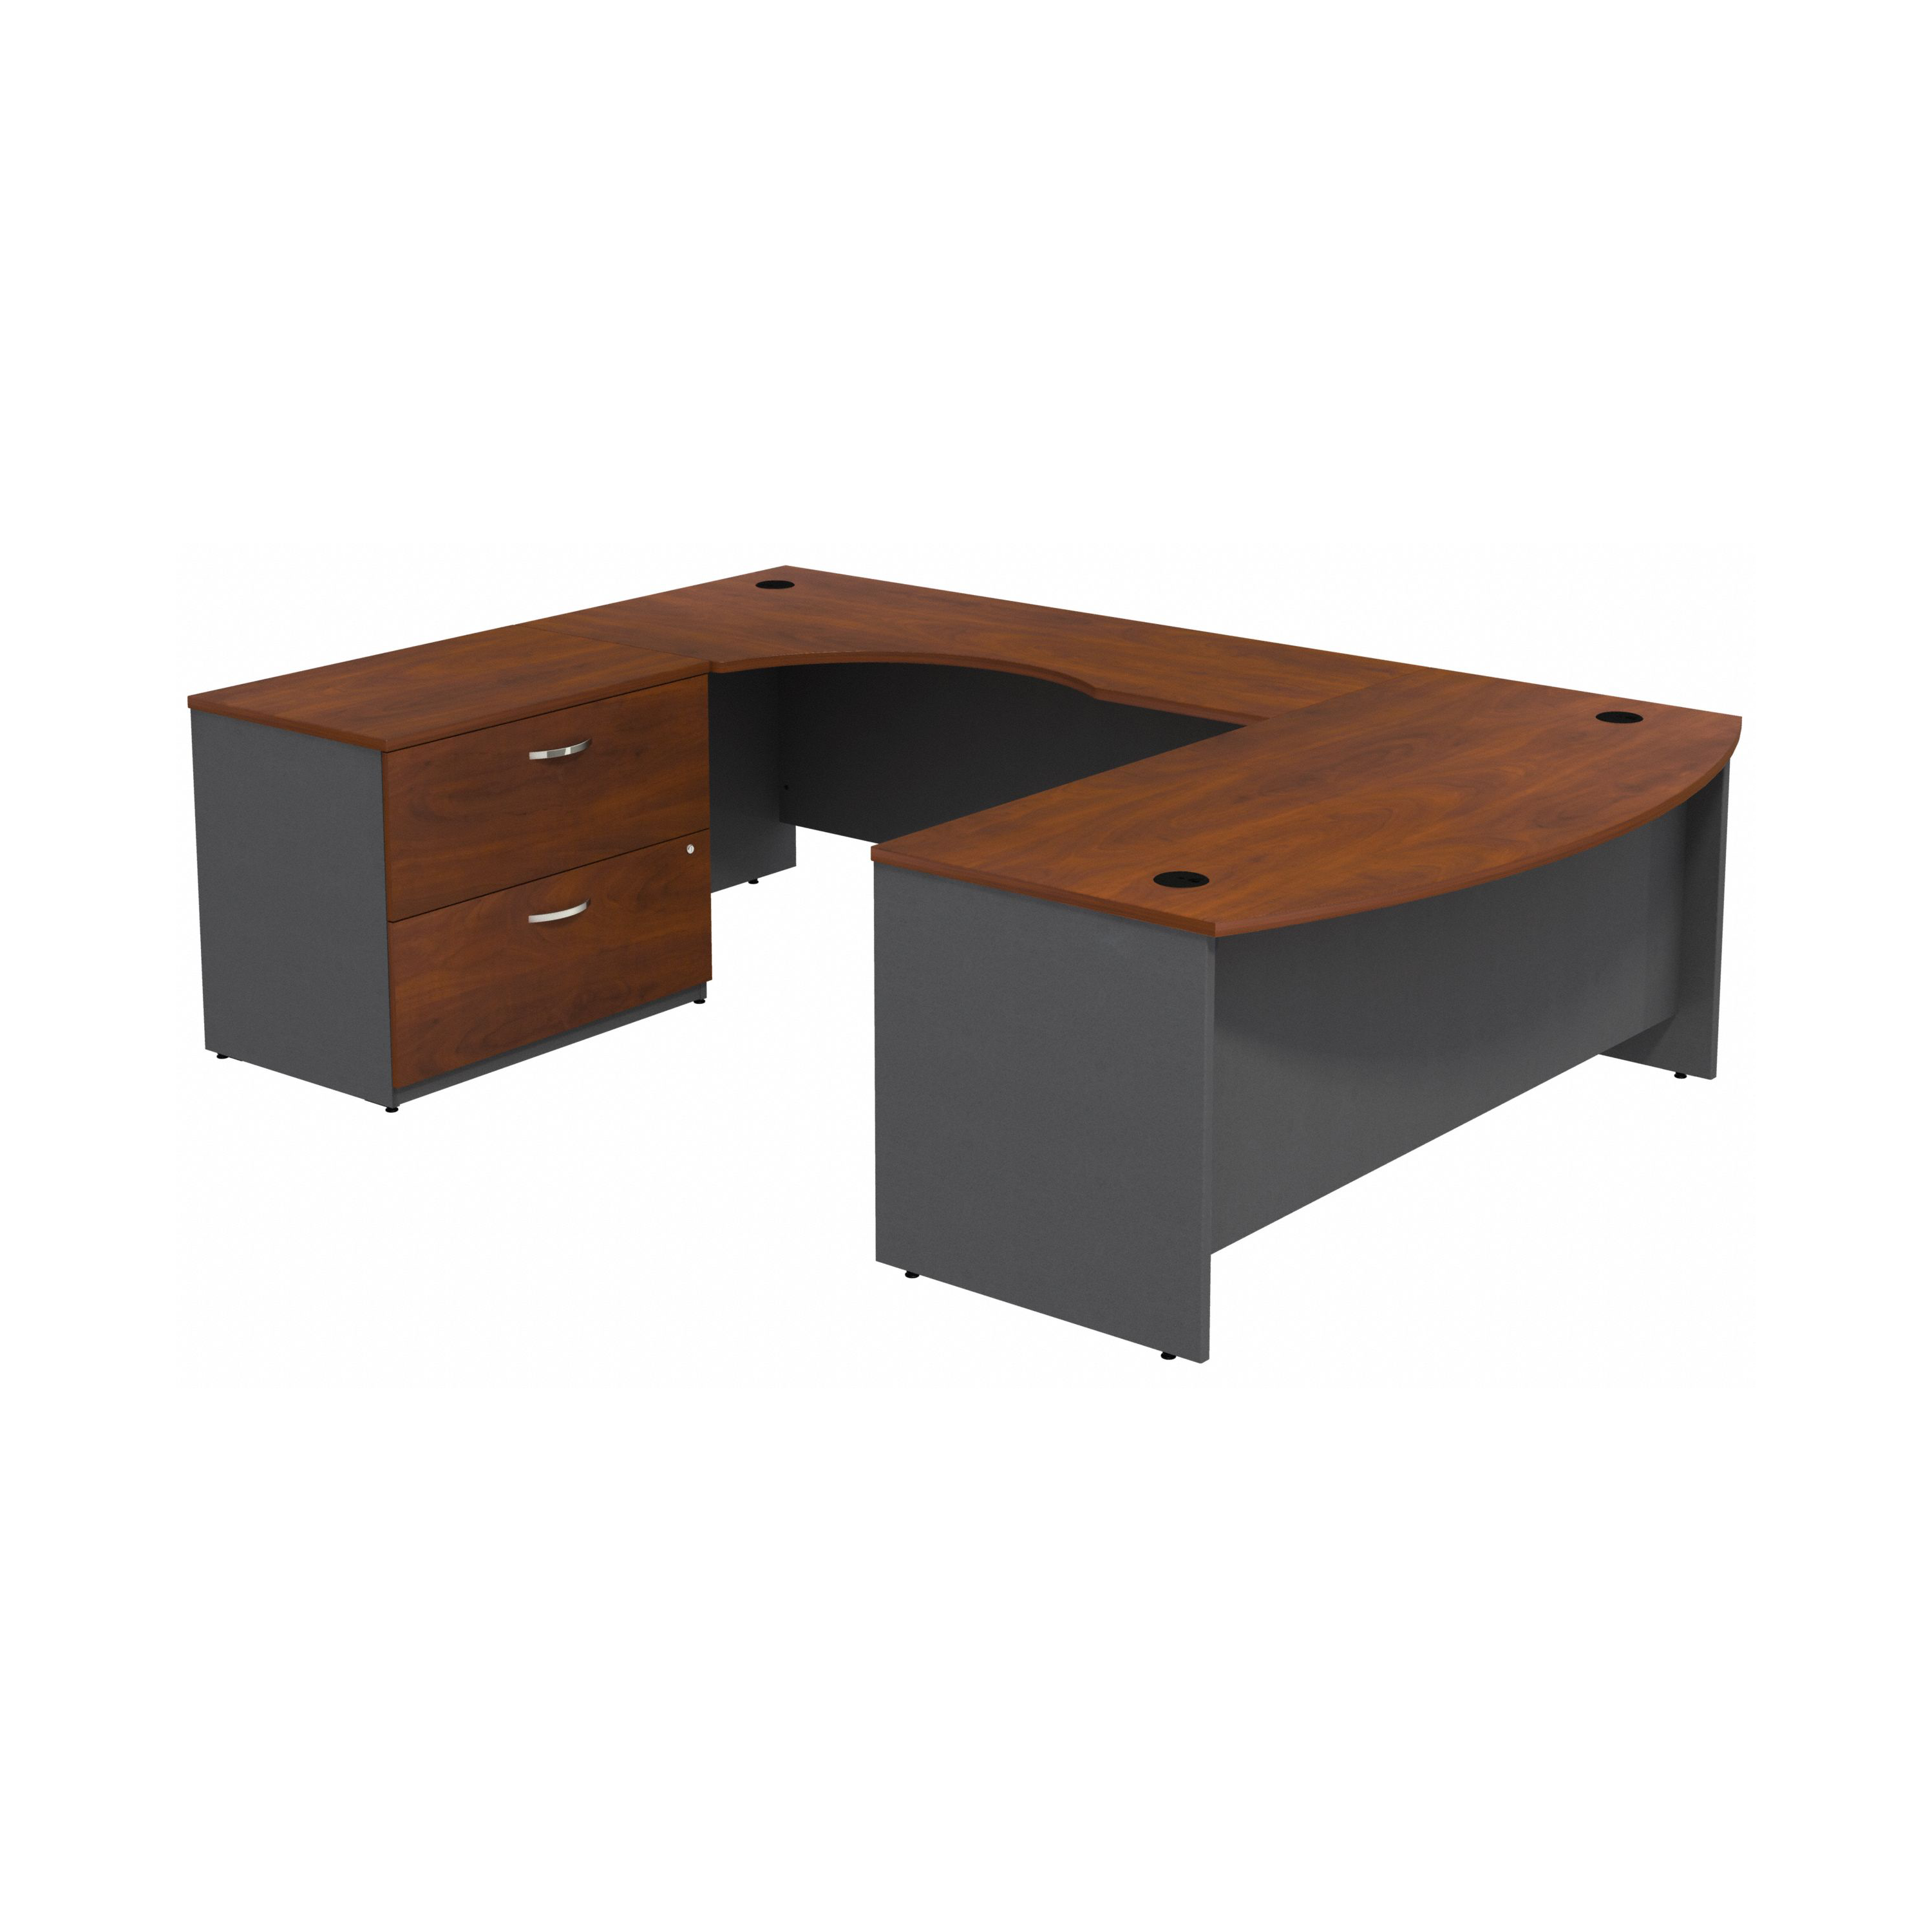 Shop Bush Business Furniture Series C Bow Front Left Handed U Shaped Desk with 2 Drawer Lateral File Cabinet 02 SRC019HCLSU #color_hansen cherry/graphite gray